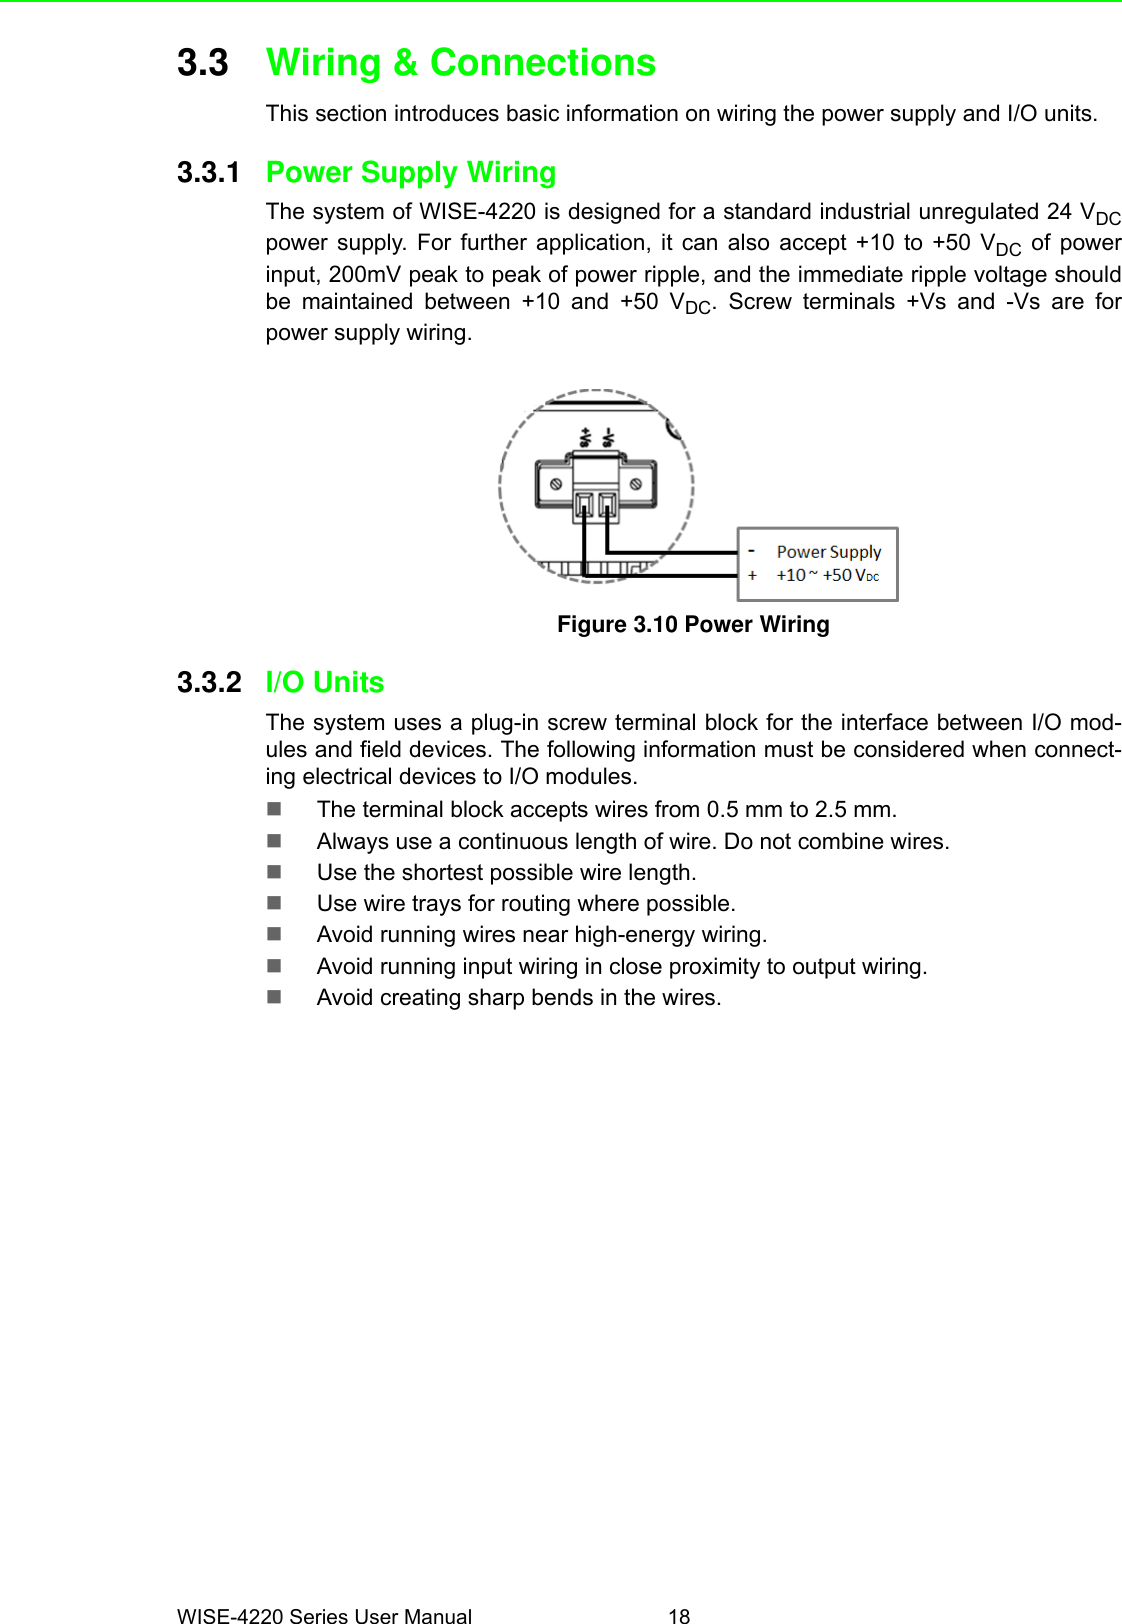 WISE-4220 Series User Manual 183.3 Wiring &amp; ConnectionsThis section introduces basic information on wiring the power supply and I/O units.3.3.1 Power Supply Wiring The system of WISE-4220 is designed for a standard industrial unregulated 24 VDCpower supply. For further application, it can also accept +10 to +50 VDC of powerinput, 200mV peak to peak of power ripple, and the immediate ripple voltage shouldbe maintained between +10 and +50 VDC. Screw terminals +Vs and -Vs are forpower supply wiring.Figure 3.10 Power Wiring3.3.2 I/O UnitsThe system uses a plug-in screw terminal block for the interface between I/O mod-ules and field devices. The following information must be considered when connect-ing electrical devices to I/O modules.The terminal block accepts wires from 0.5 mm to 2.5 mm.Always use a continuous length of wire. Do not combine wires.Use the shortest possible wire length.Use wire trays for routing where possible.Avoid running wires near high-energy wiring.Avoid running input wiring in close proximity to output wiring.Avoid creating sharp bends in the wires.